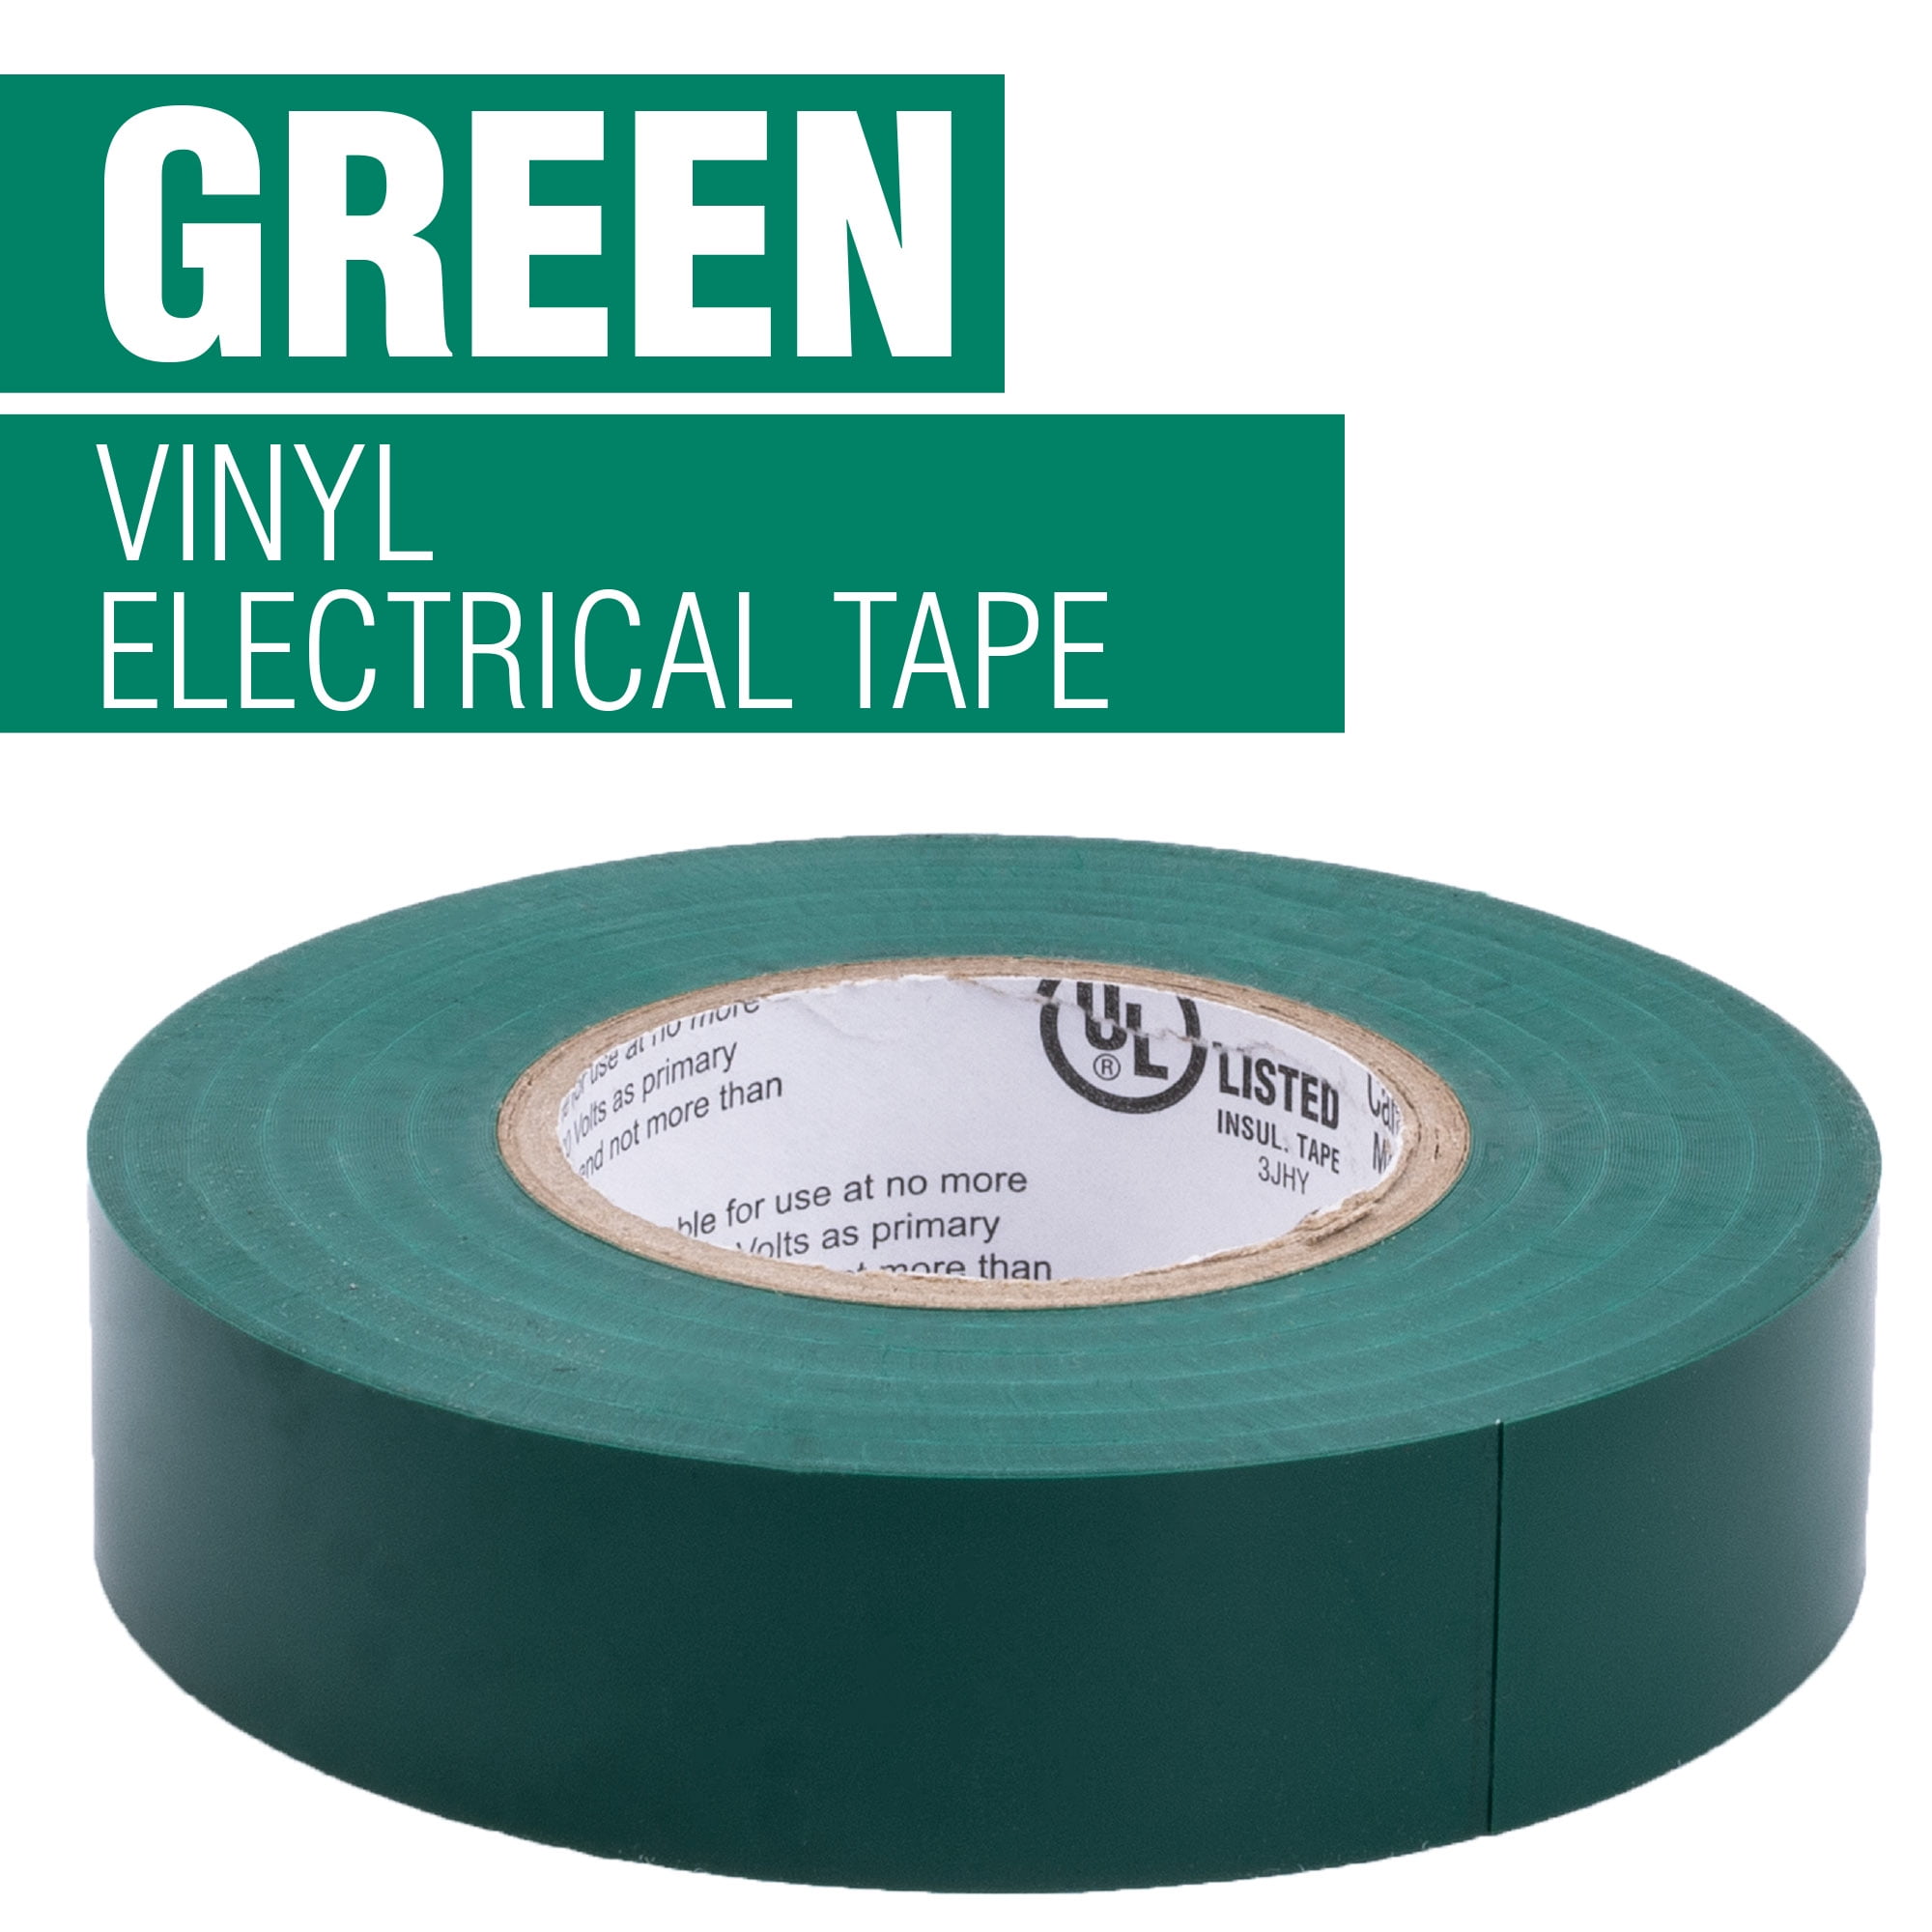 2-Roll BYBON Vinyl Electrical Tape Black,3/4 in x 60 ft UL-Listed, 